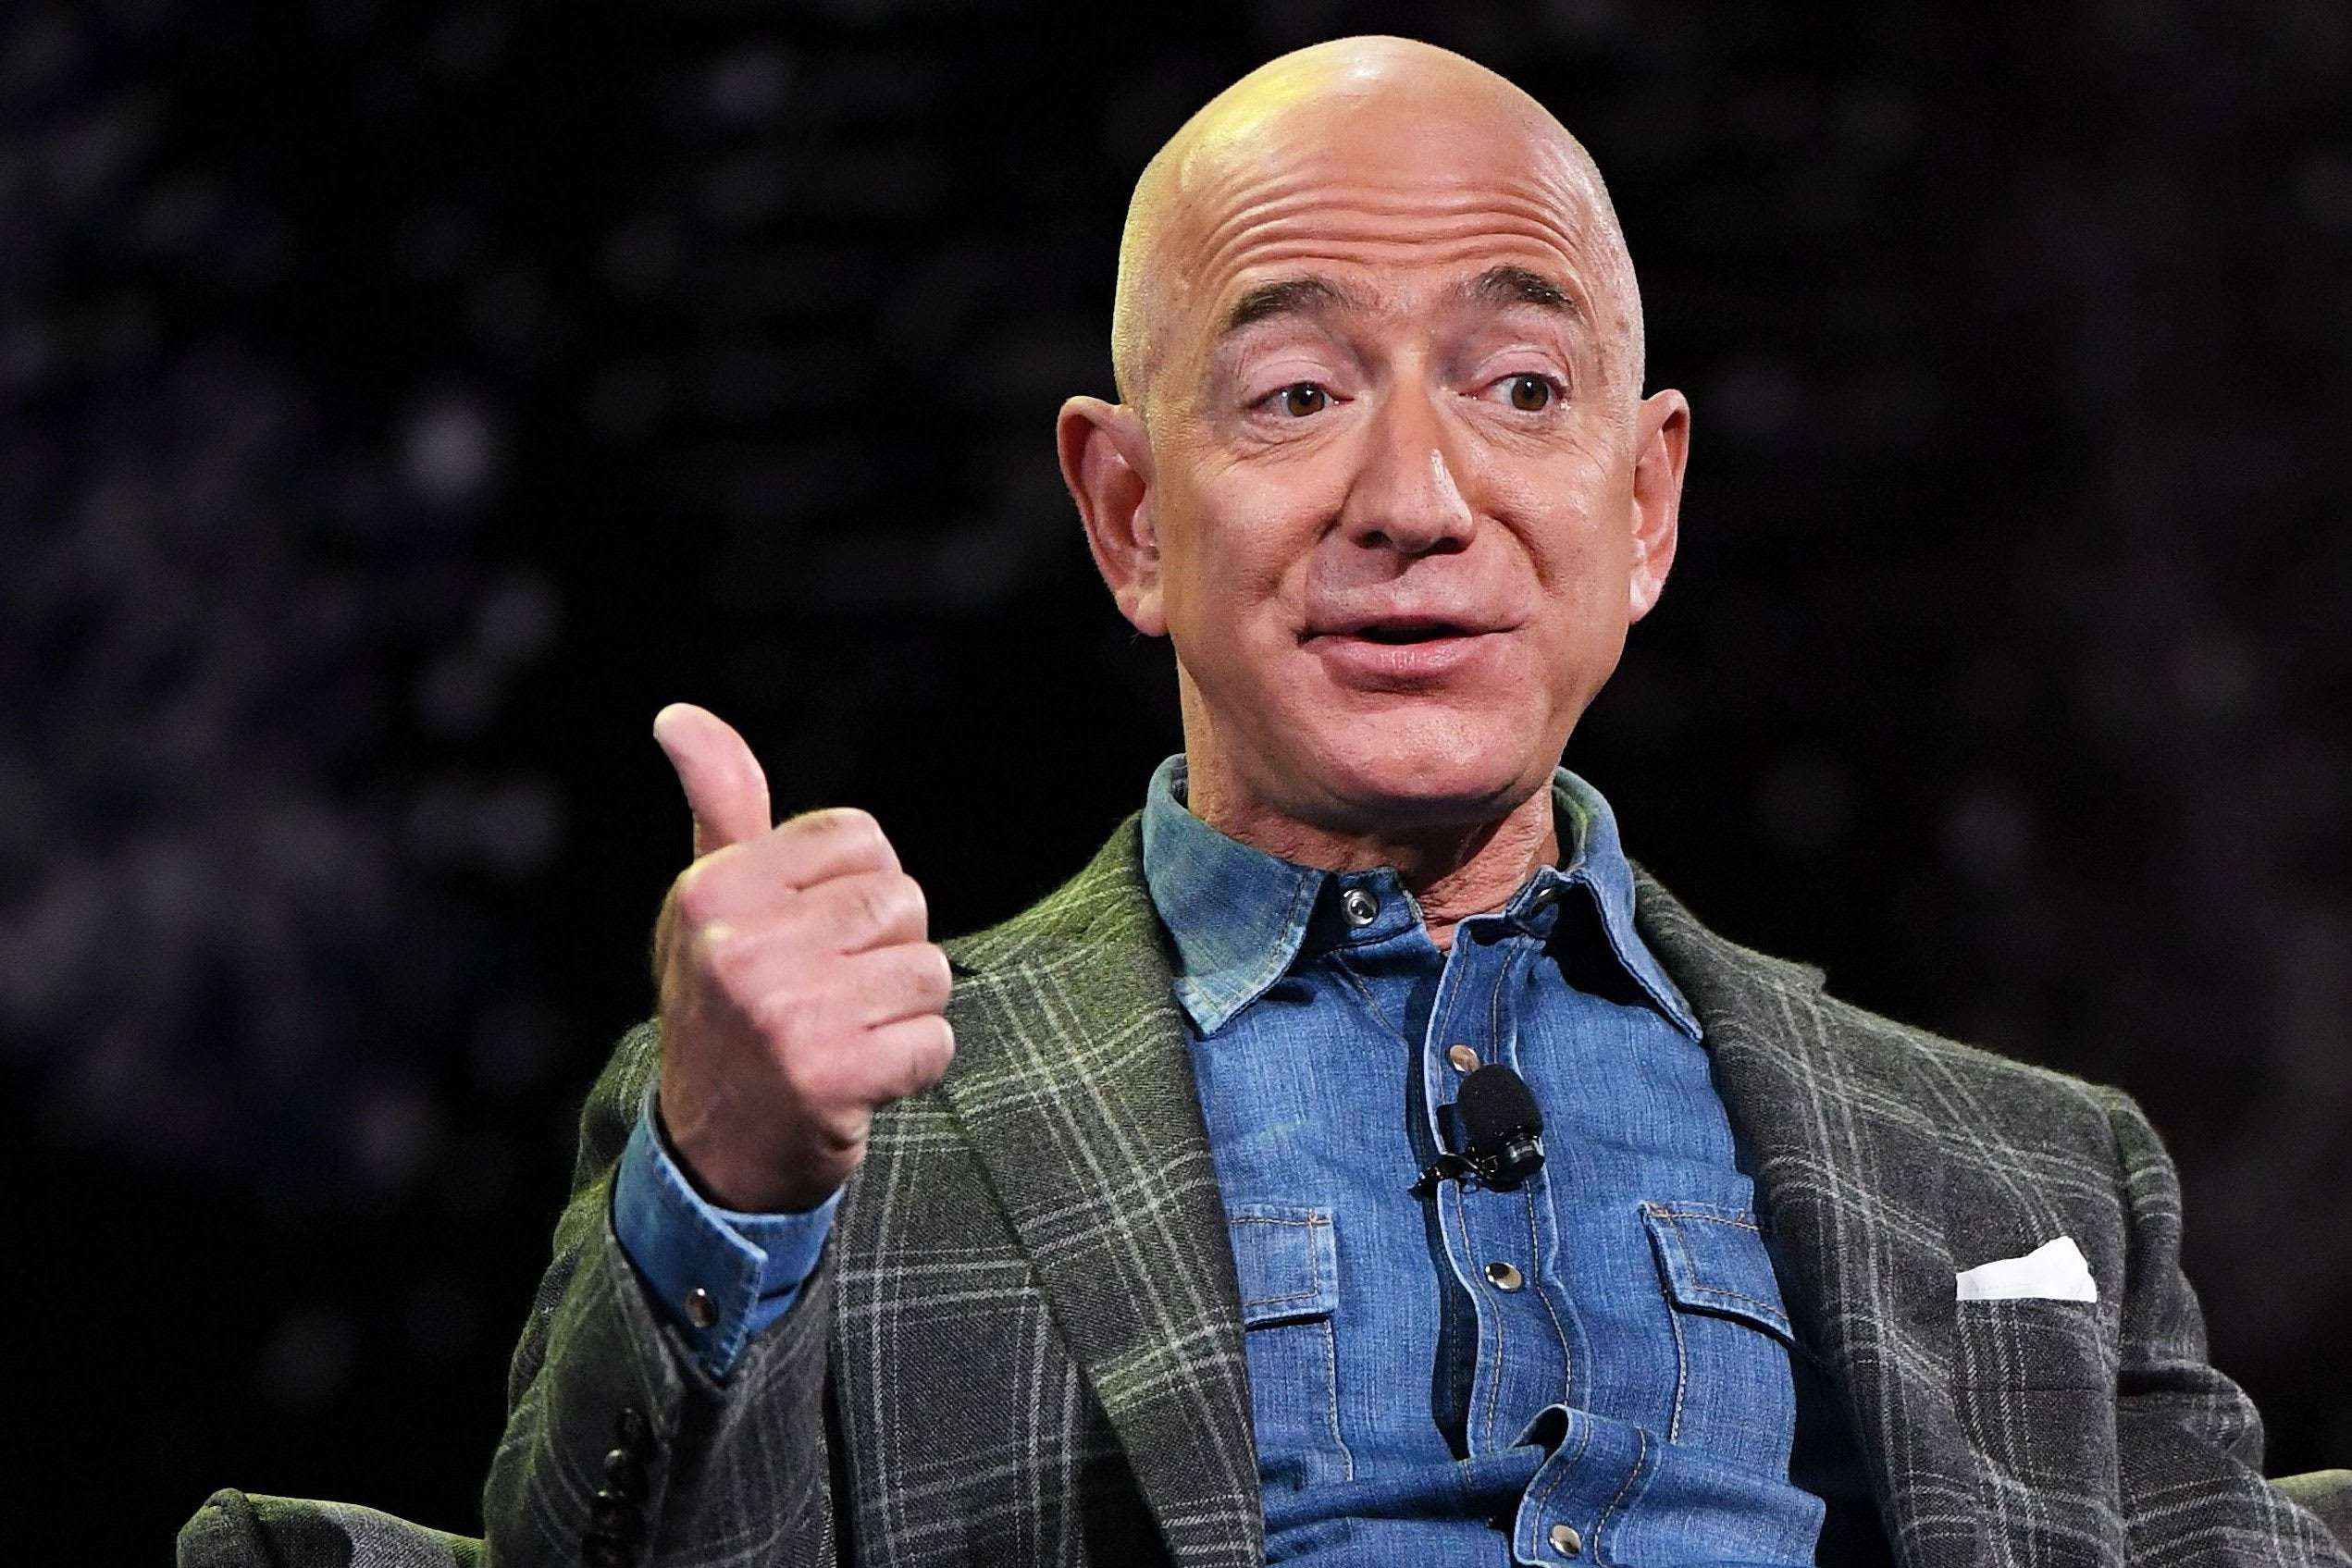 image for Jeff Bezos makes $98.5 million donation, UK Labour leader calls him out: 'Just pay your taxes'